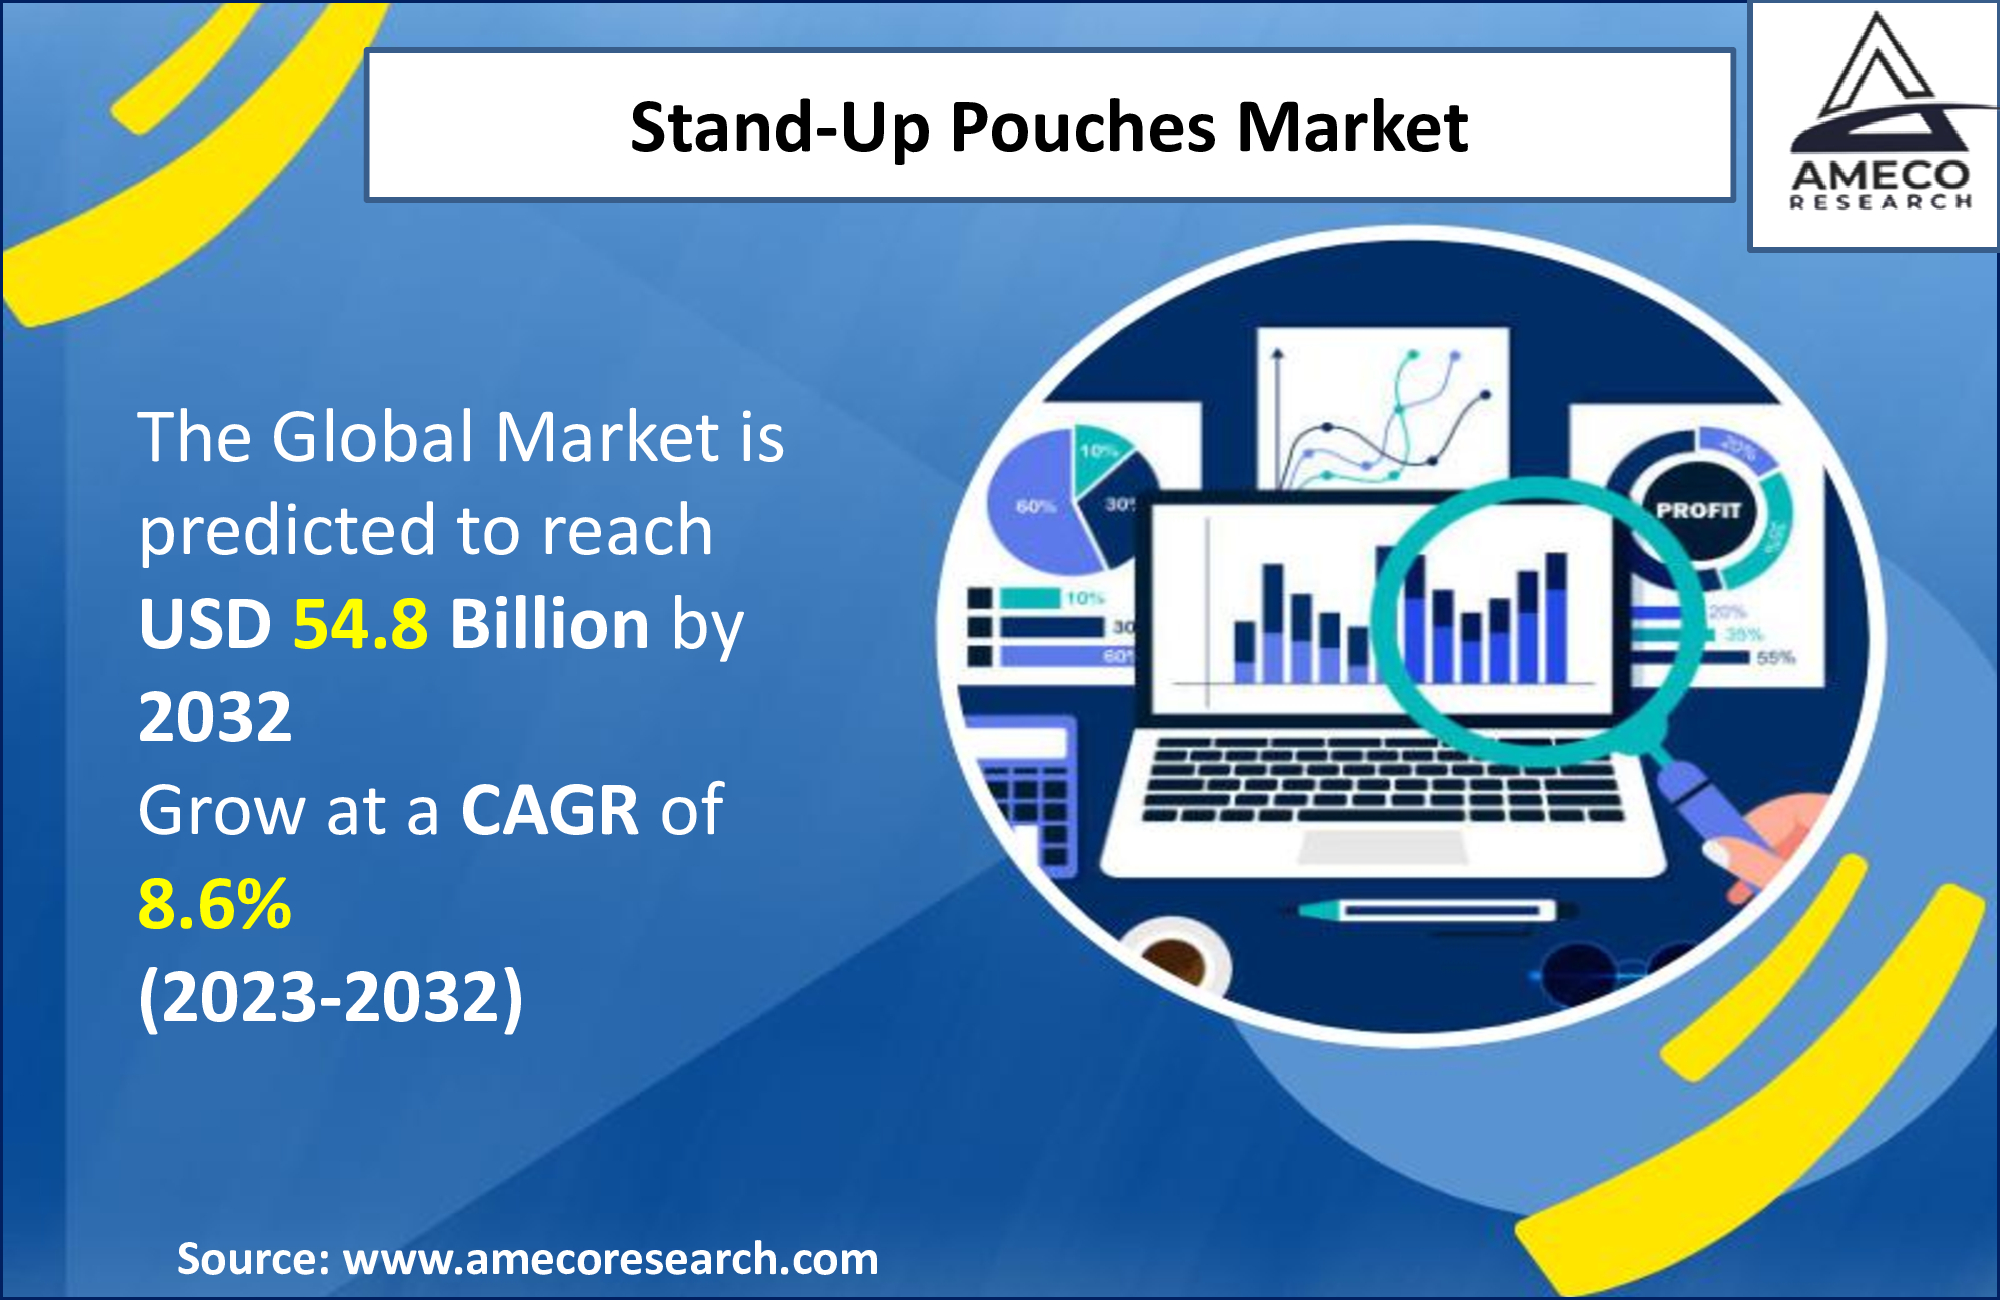 Stand-Up Pouches Market